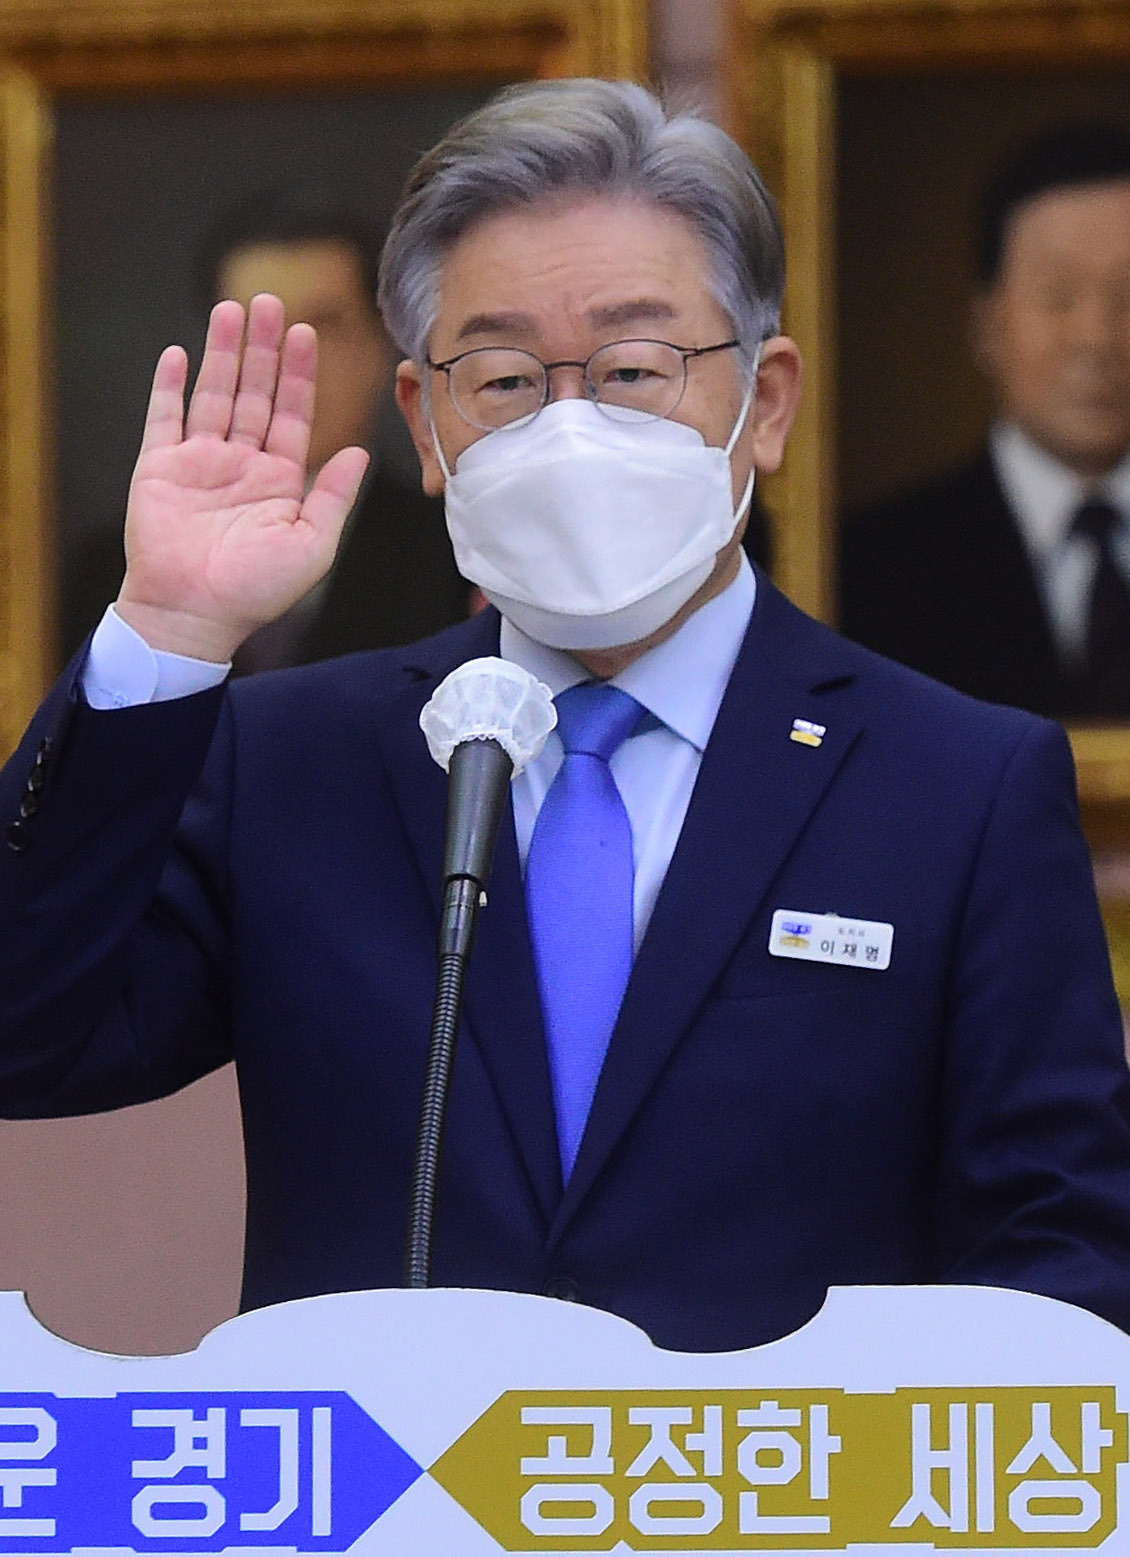 This photo, provided by the National Assembly's photo press corps, shows Gyeonggi Gov. Lee Jae-myung taking an oath at the start of a parliamentary audit of his government at the Gyeonggi provincial government office in Suwon, south of Seoul, on Monday. (National Assembly Photo Press Corps)